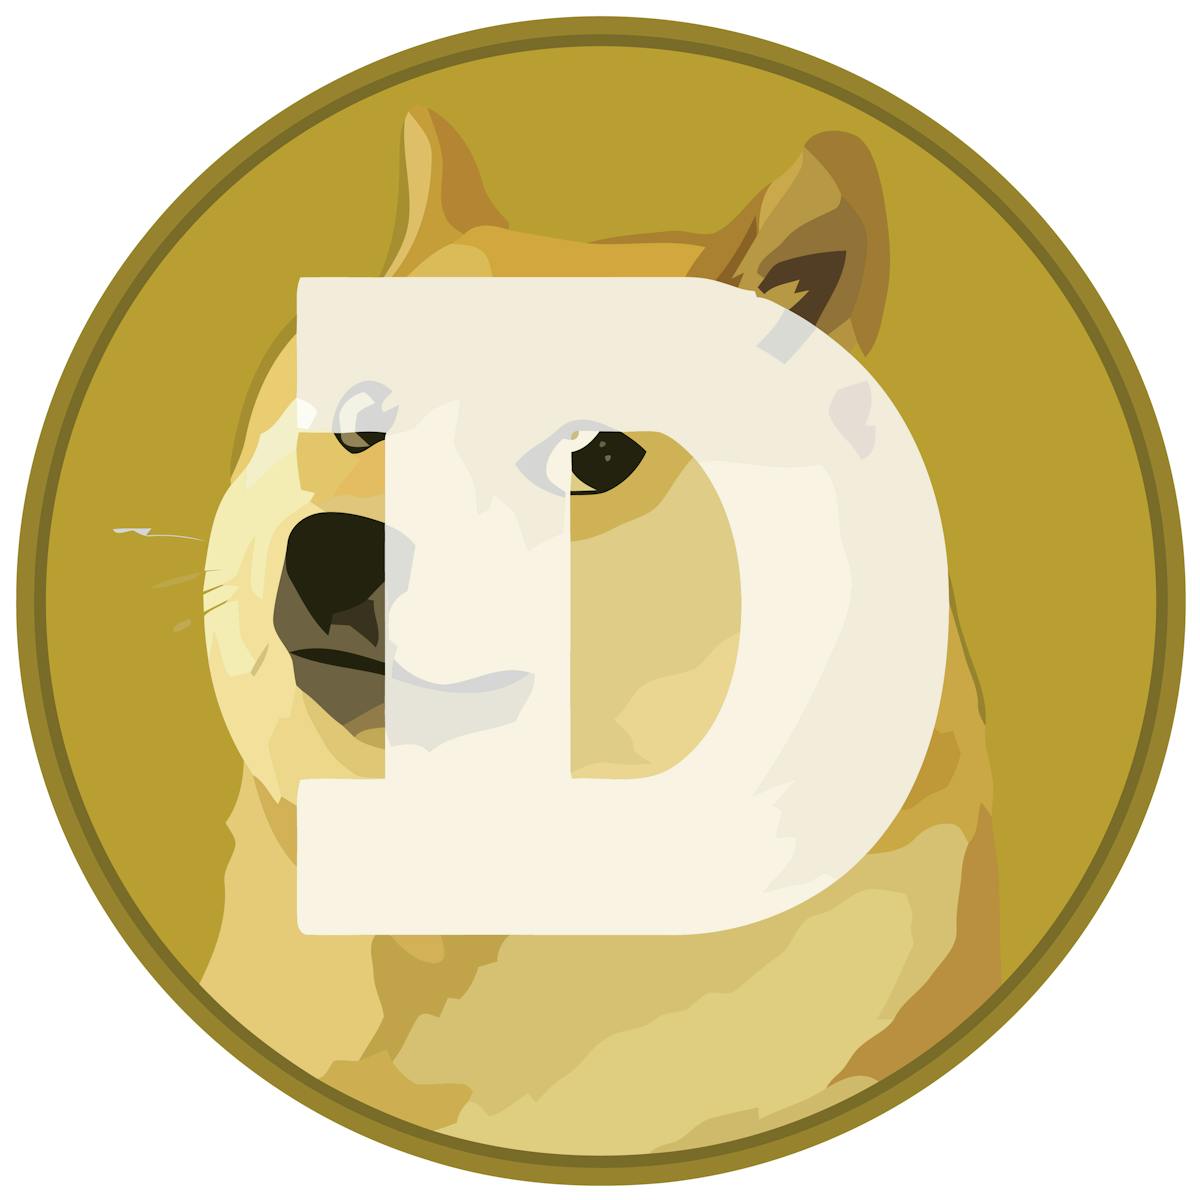 Why Bitcoin is taken more seriously than Dogecoin